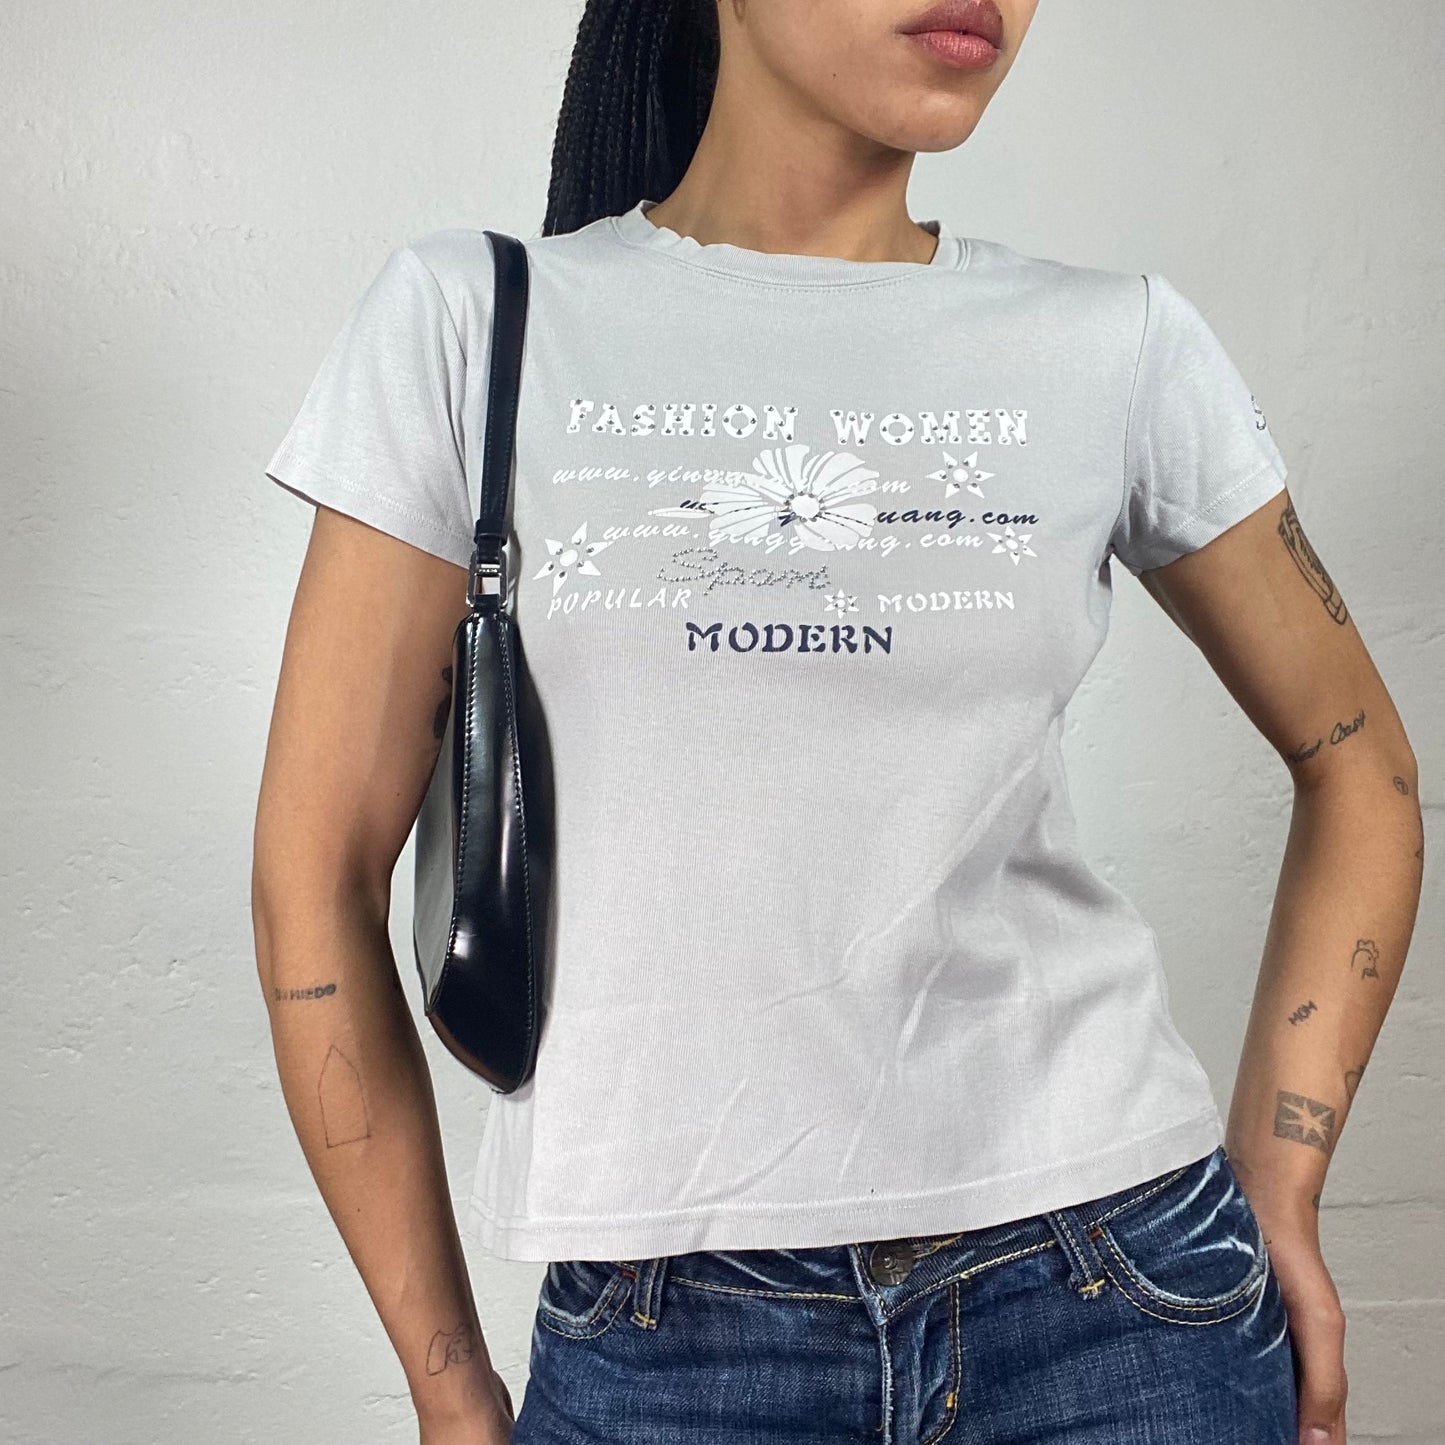 Vintage 2000's Downtown Girl Light Grey Baby Tee with White Typography Print Details (M/L)